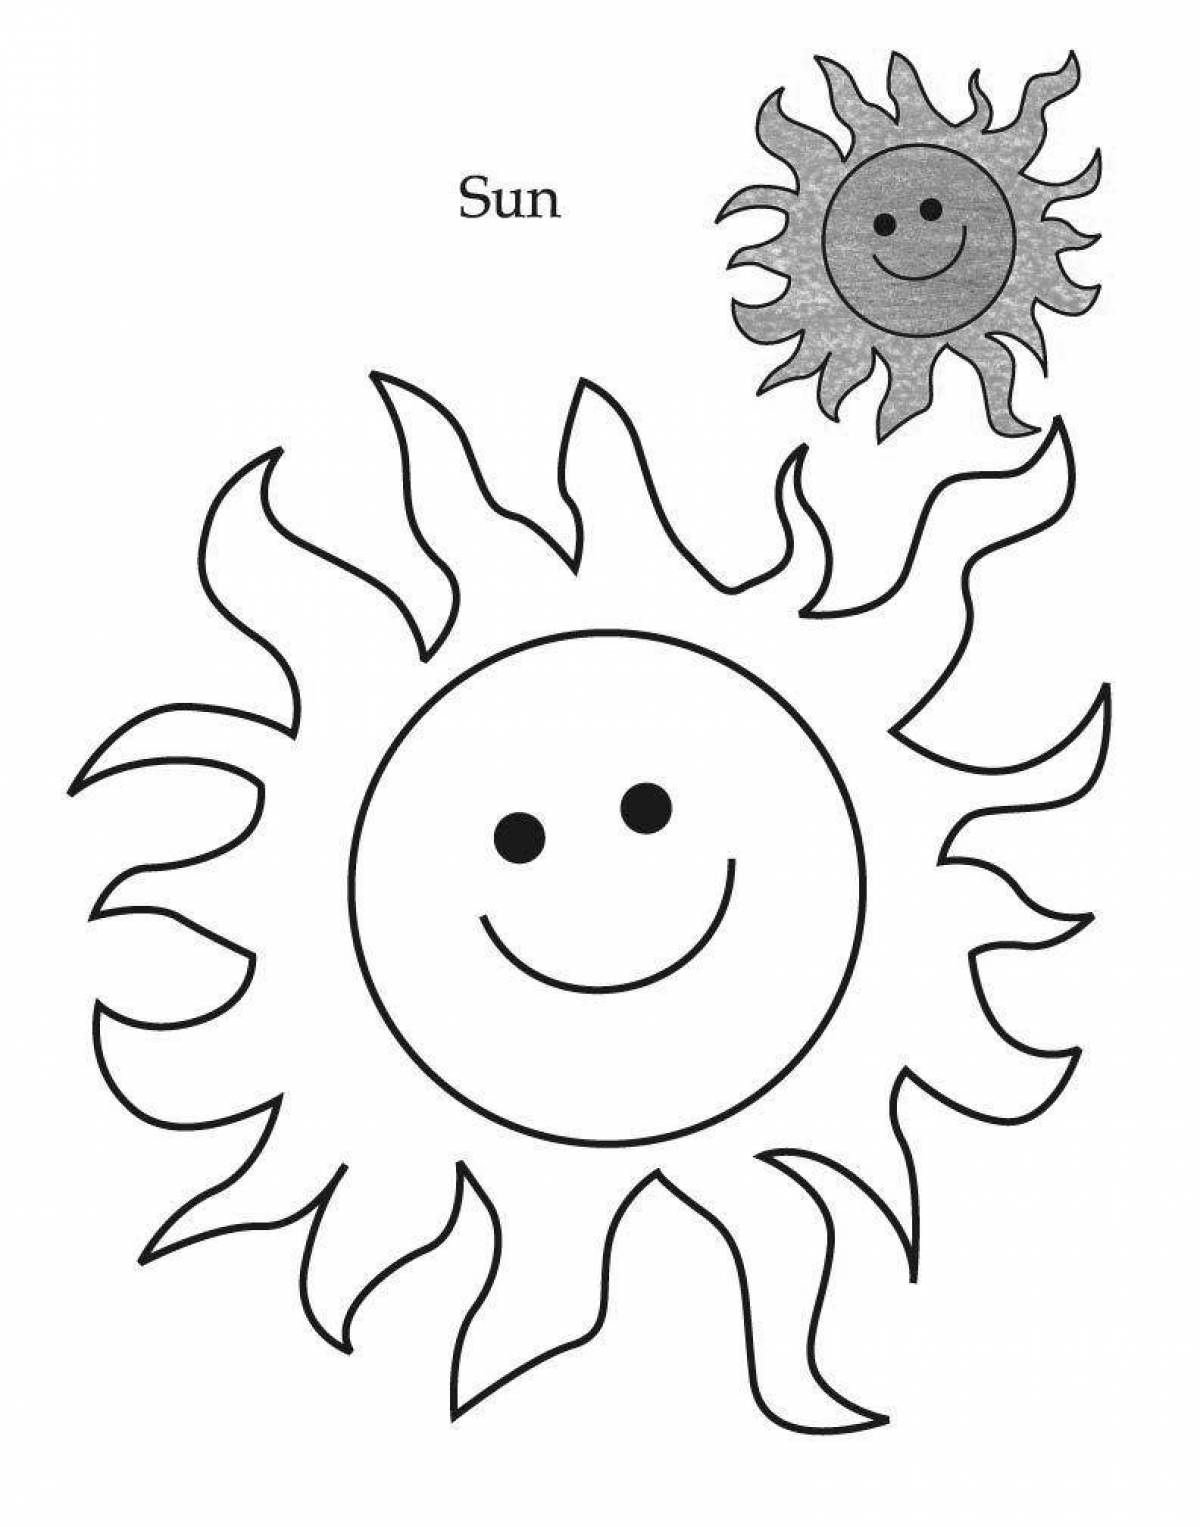 Coloring page luxury carnival sun